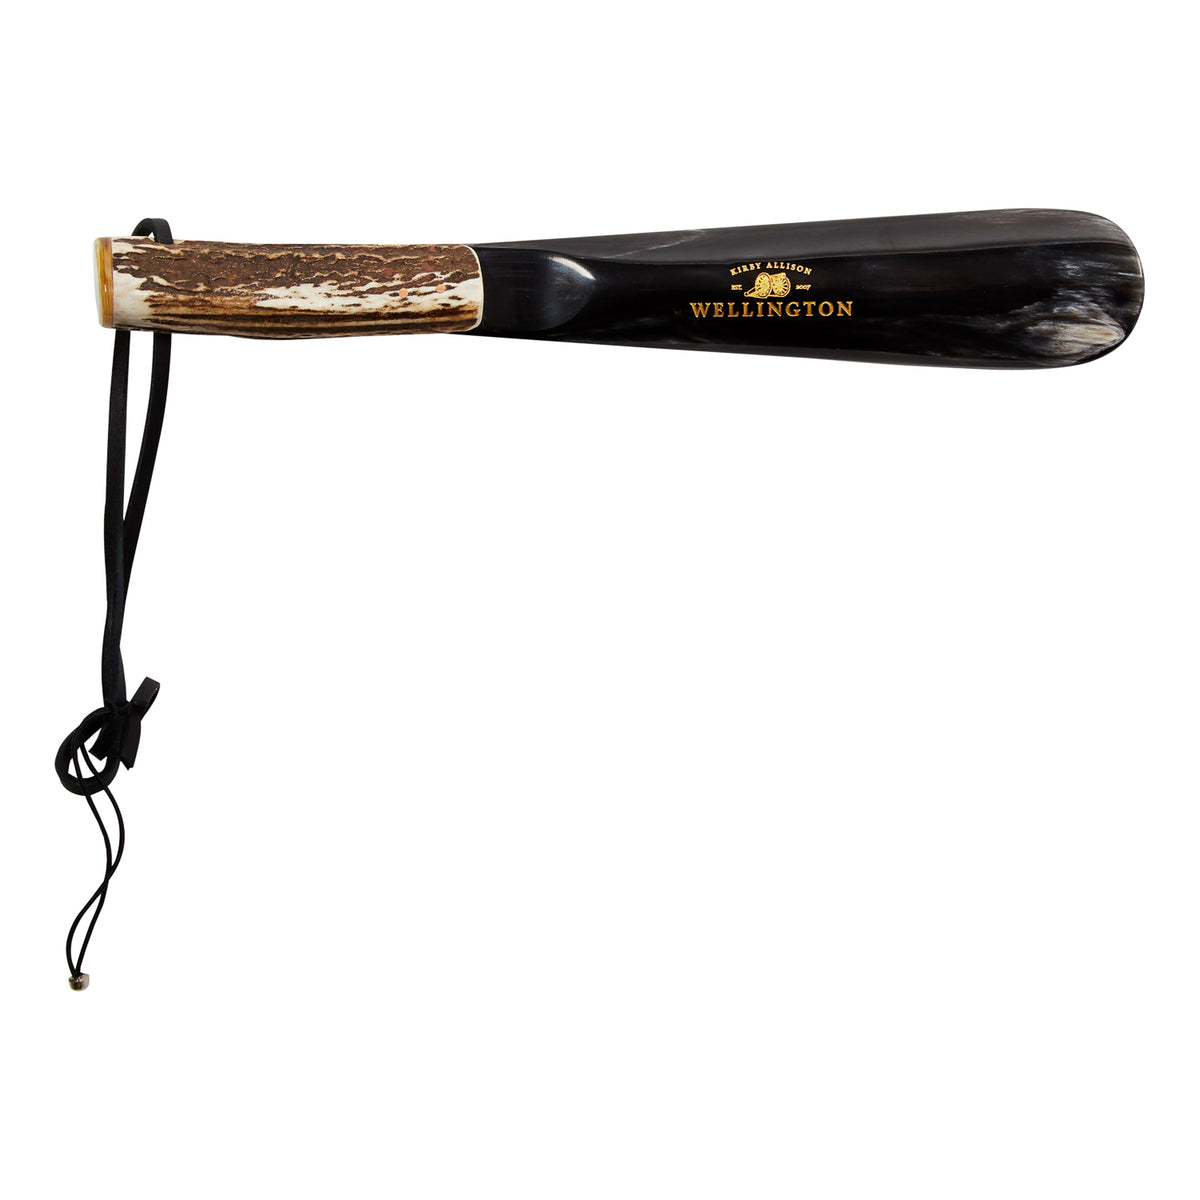 A quirky addition to your collection: the Wellington 10-inch Stag-Handle Shoehorn from KirbyAllison.com.